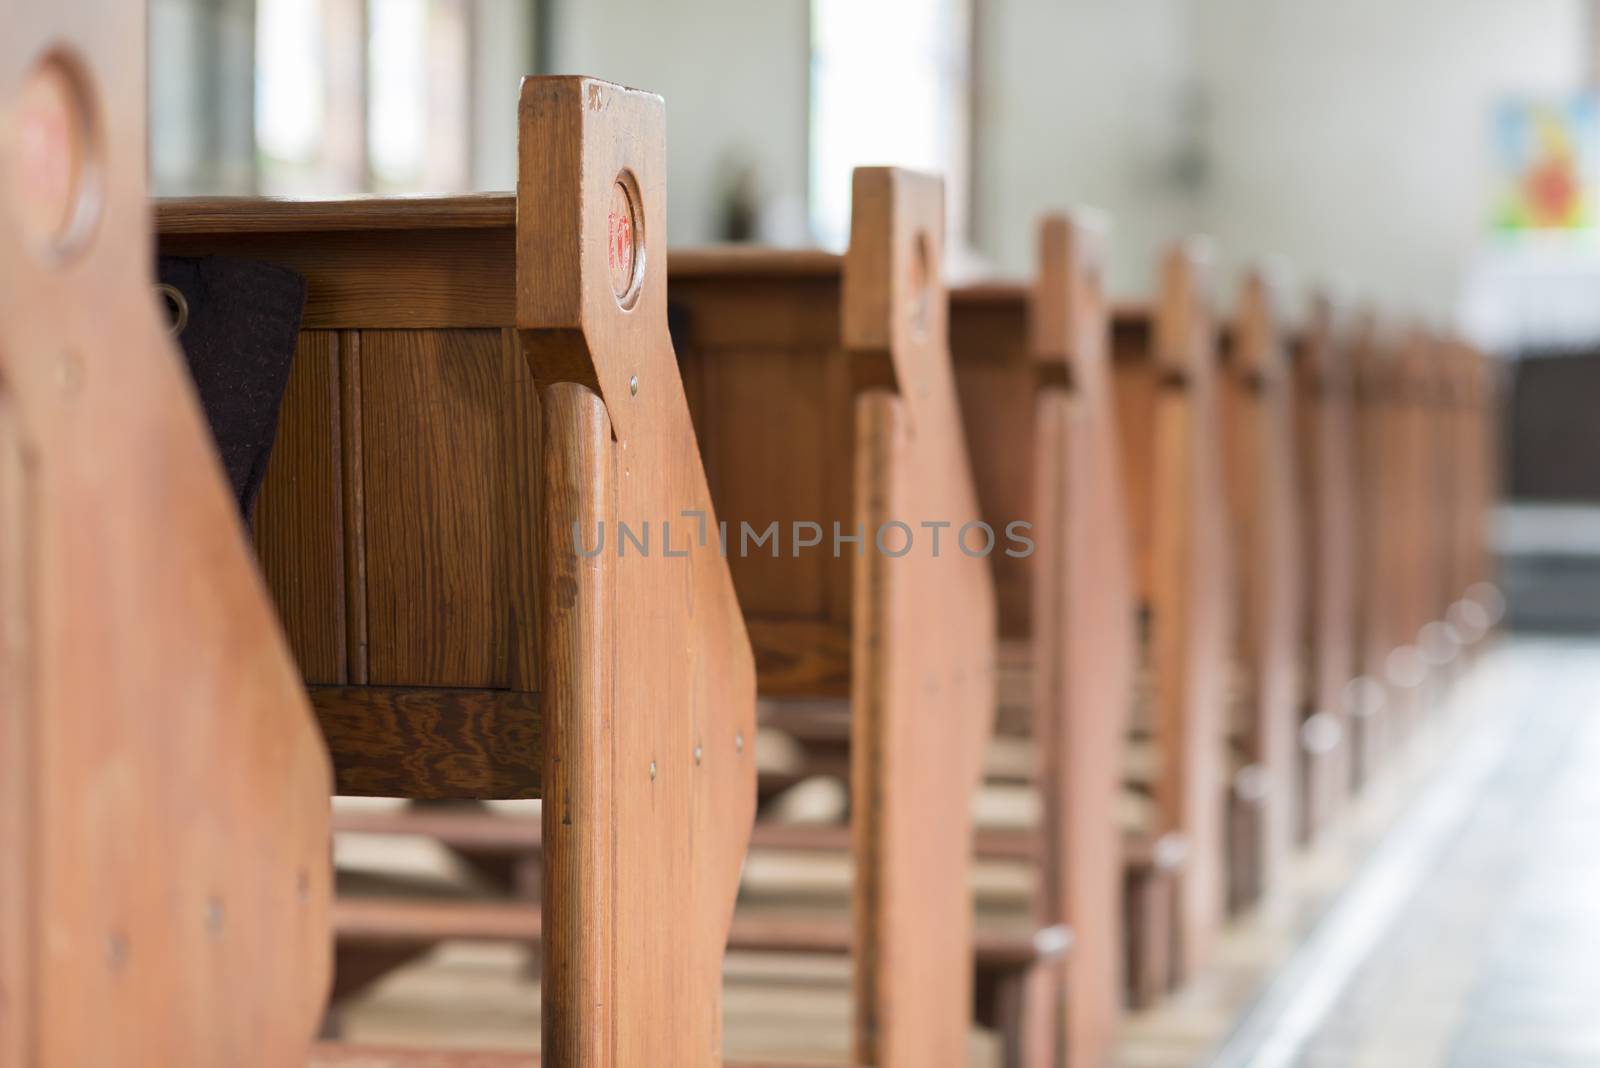 Pews in a historic church in the Netherlands
